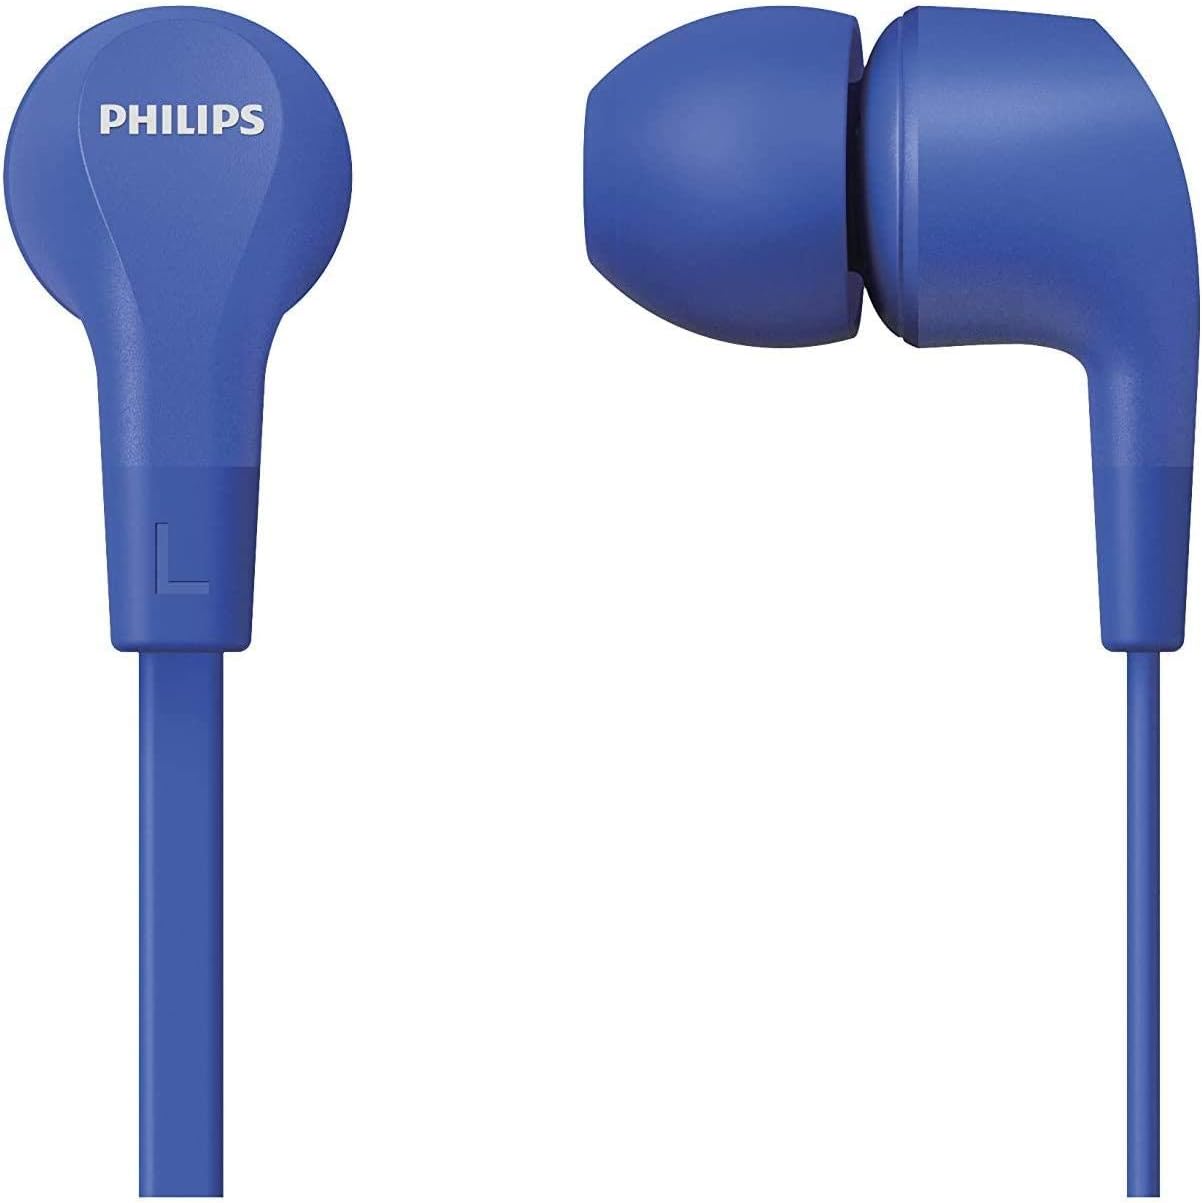 PHILIPS Audio In-Ear Headphones E1105BL/00 With In-Line Remote Control ,Blue